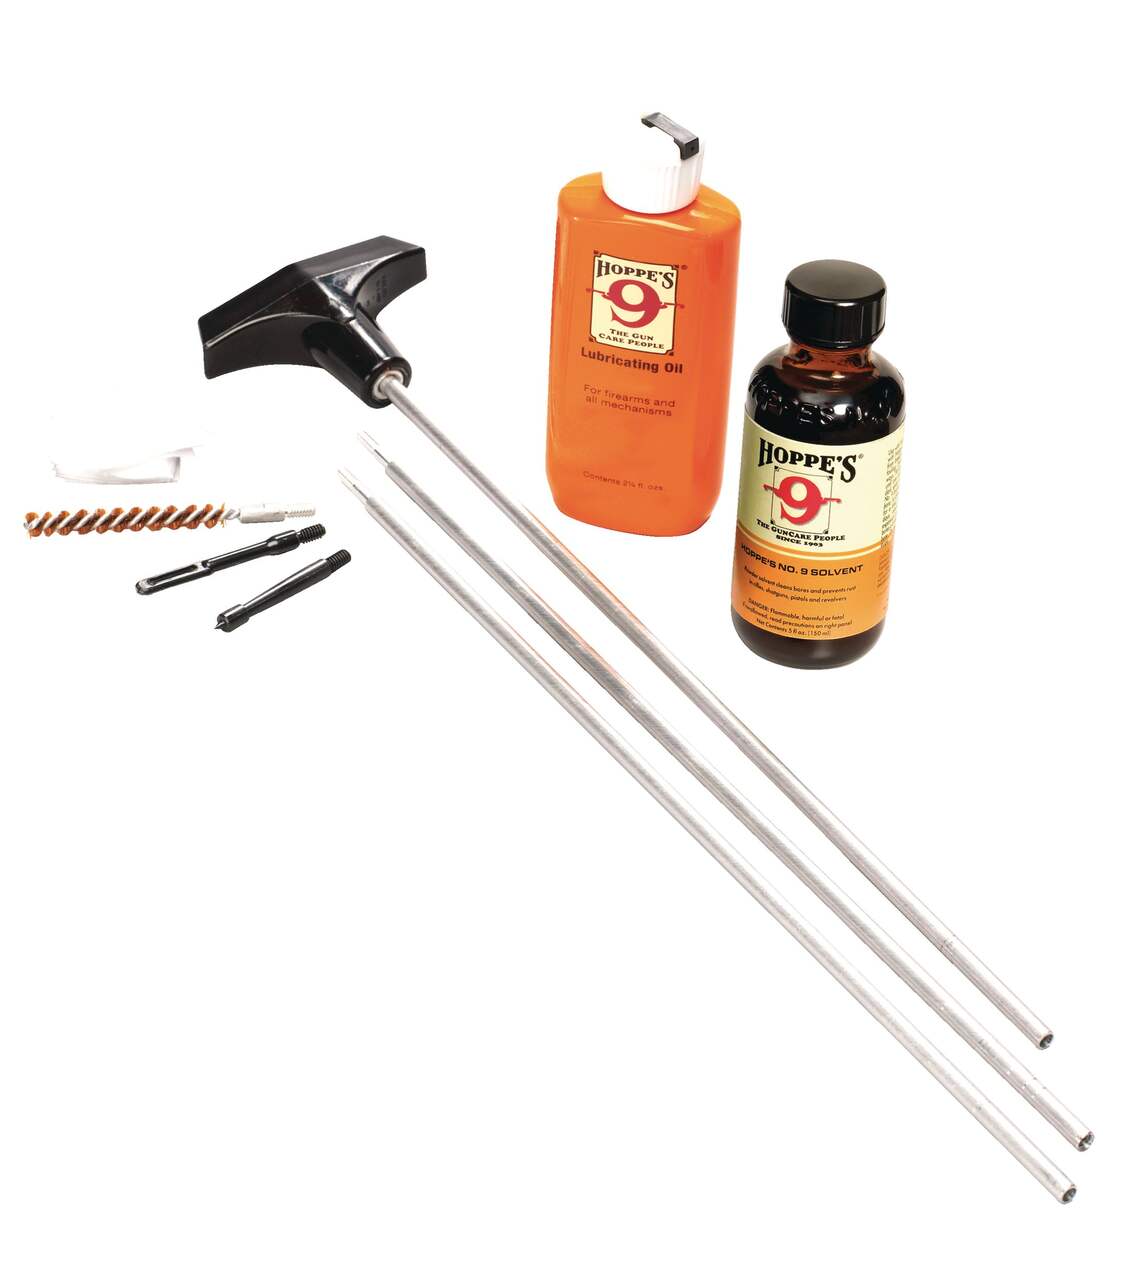 Hoppe's Hunting Gun Cleaning Kit, .22 - .225 Caliber with Aluminum Rod